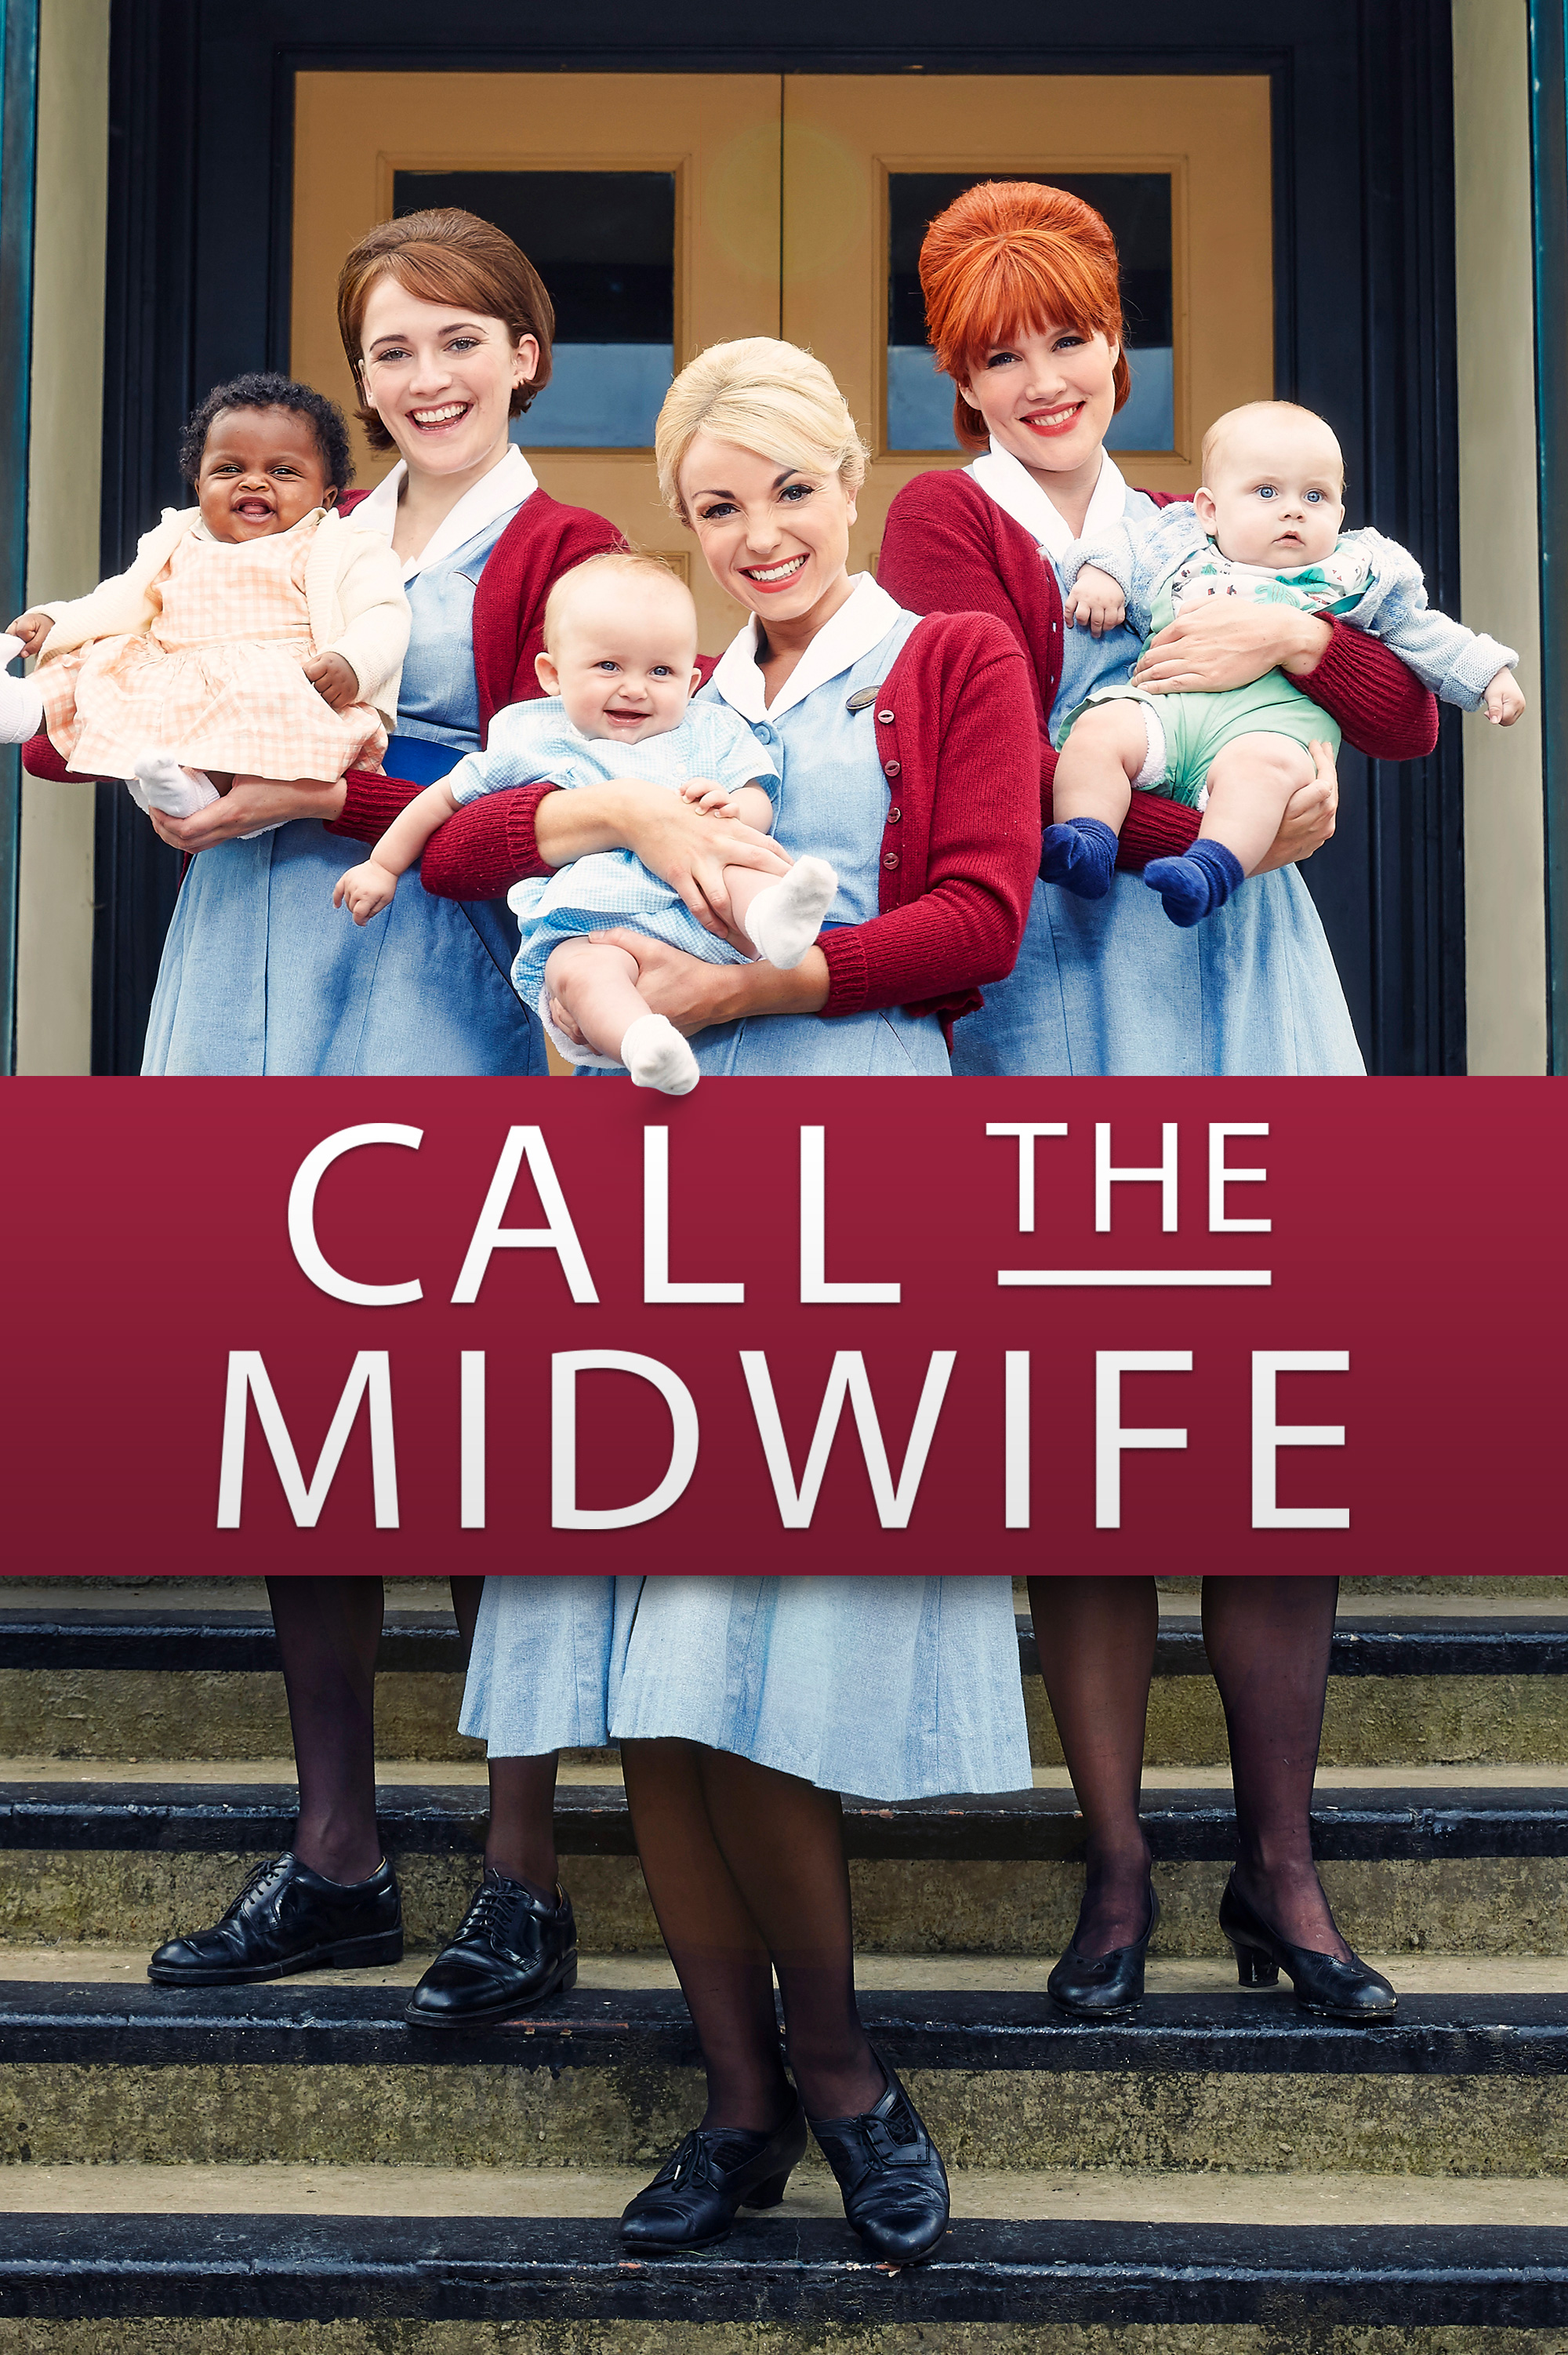 Friday Night at the Movies – Call the Midwife, Season 6